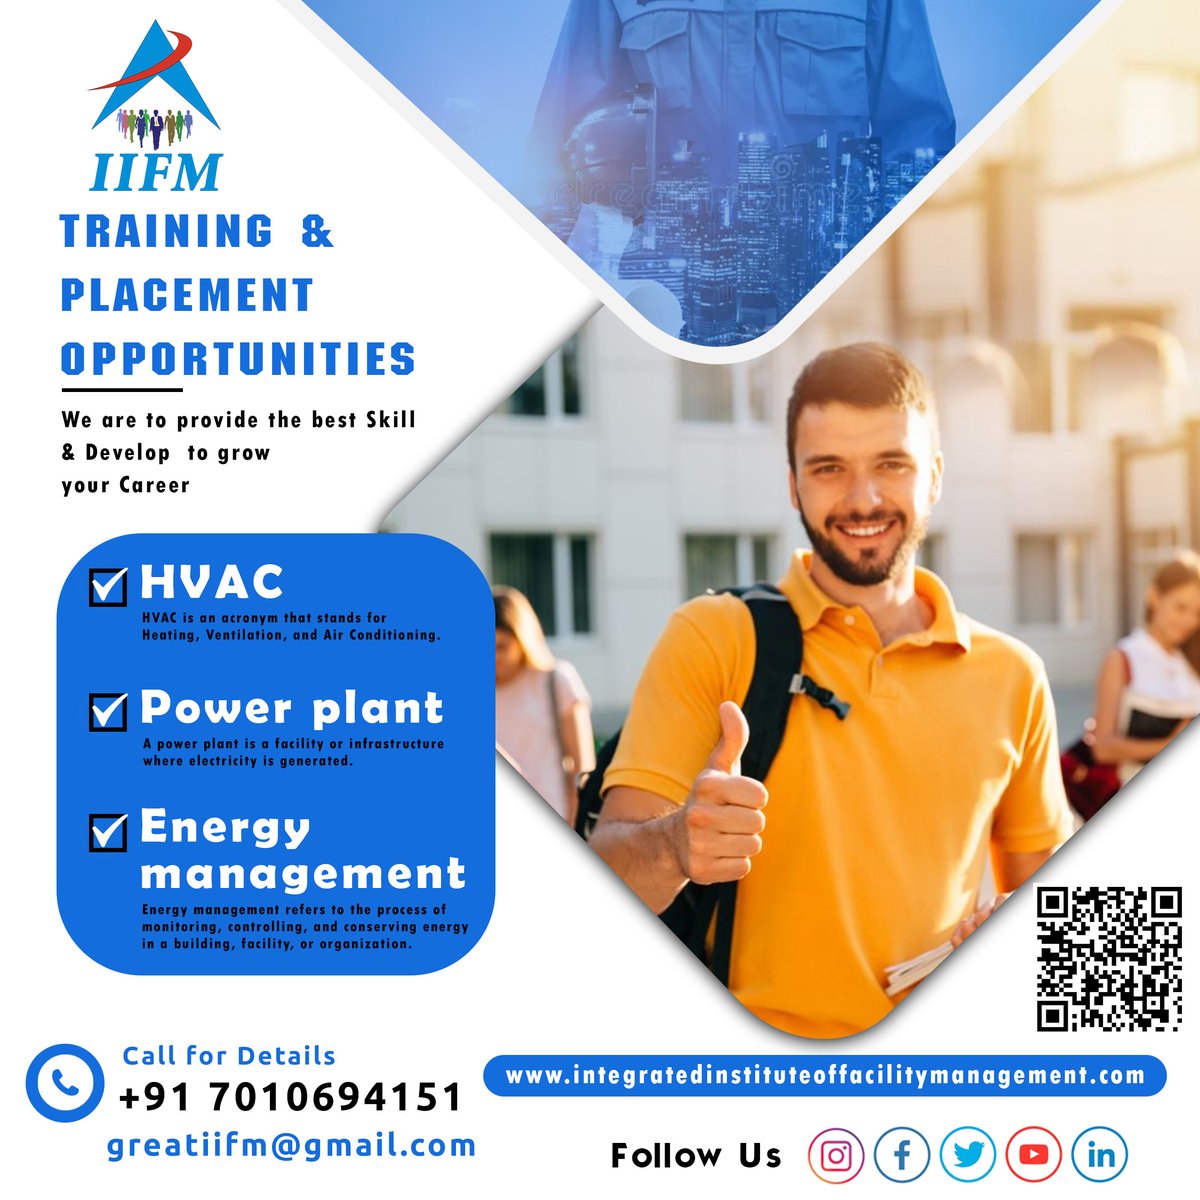 Training & Placement Opportunities!
We are committed to provide the best Skill & Develop  to grow your Career
#engineeringlife #mechanical #tech #science #civilengineer #memes #engineeringmemes #engineeringstudent #electricalengineering #producer #mechanic #electronics #electrica